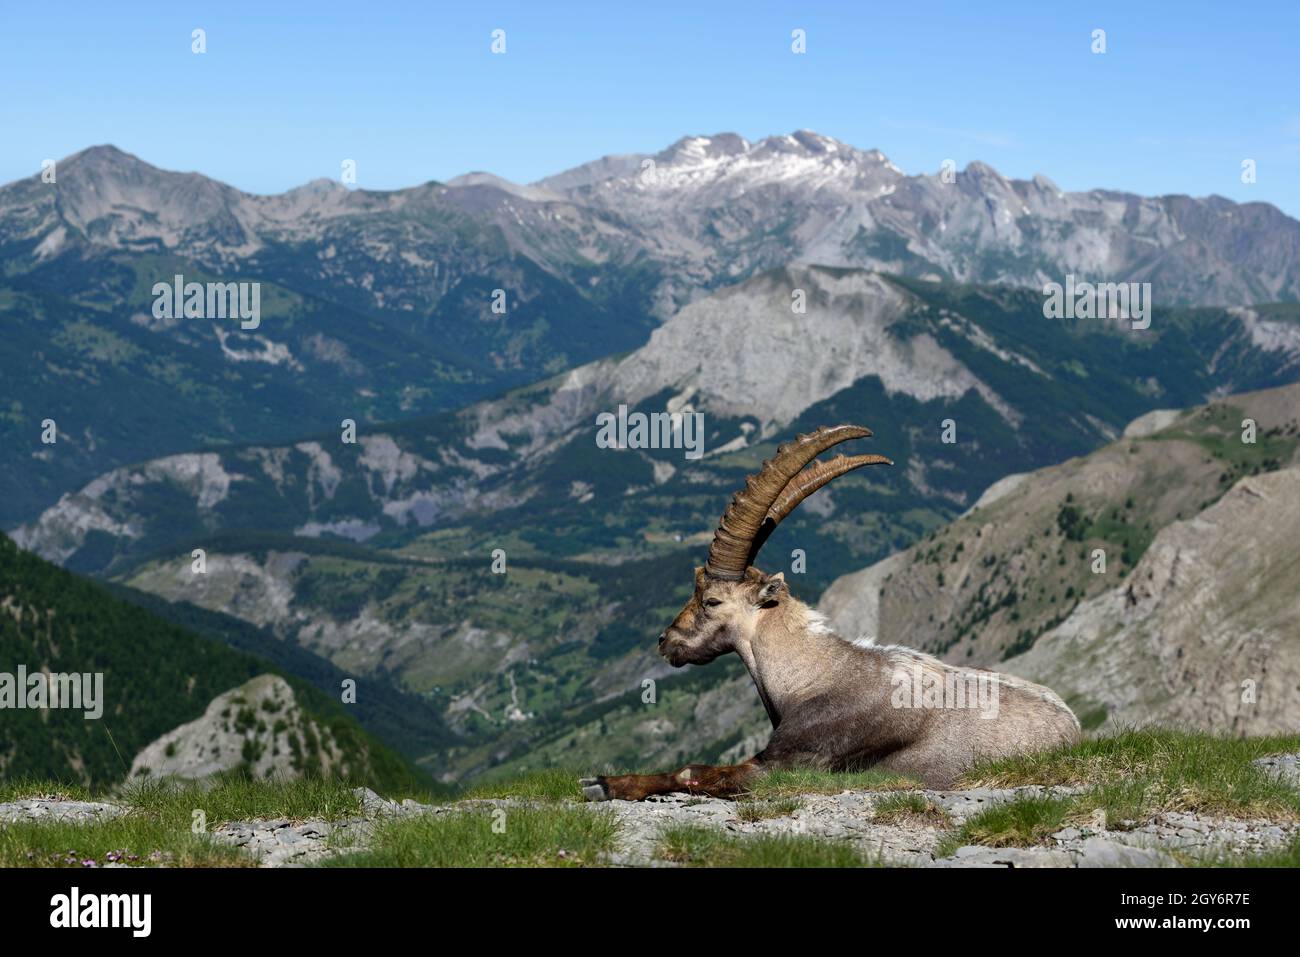 Mature Male Alpine Ibex, Capra ibex, in Landscape Setting with French Alps and Mountains in the Mercantour National Park France Stock Photo